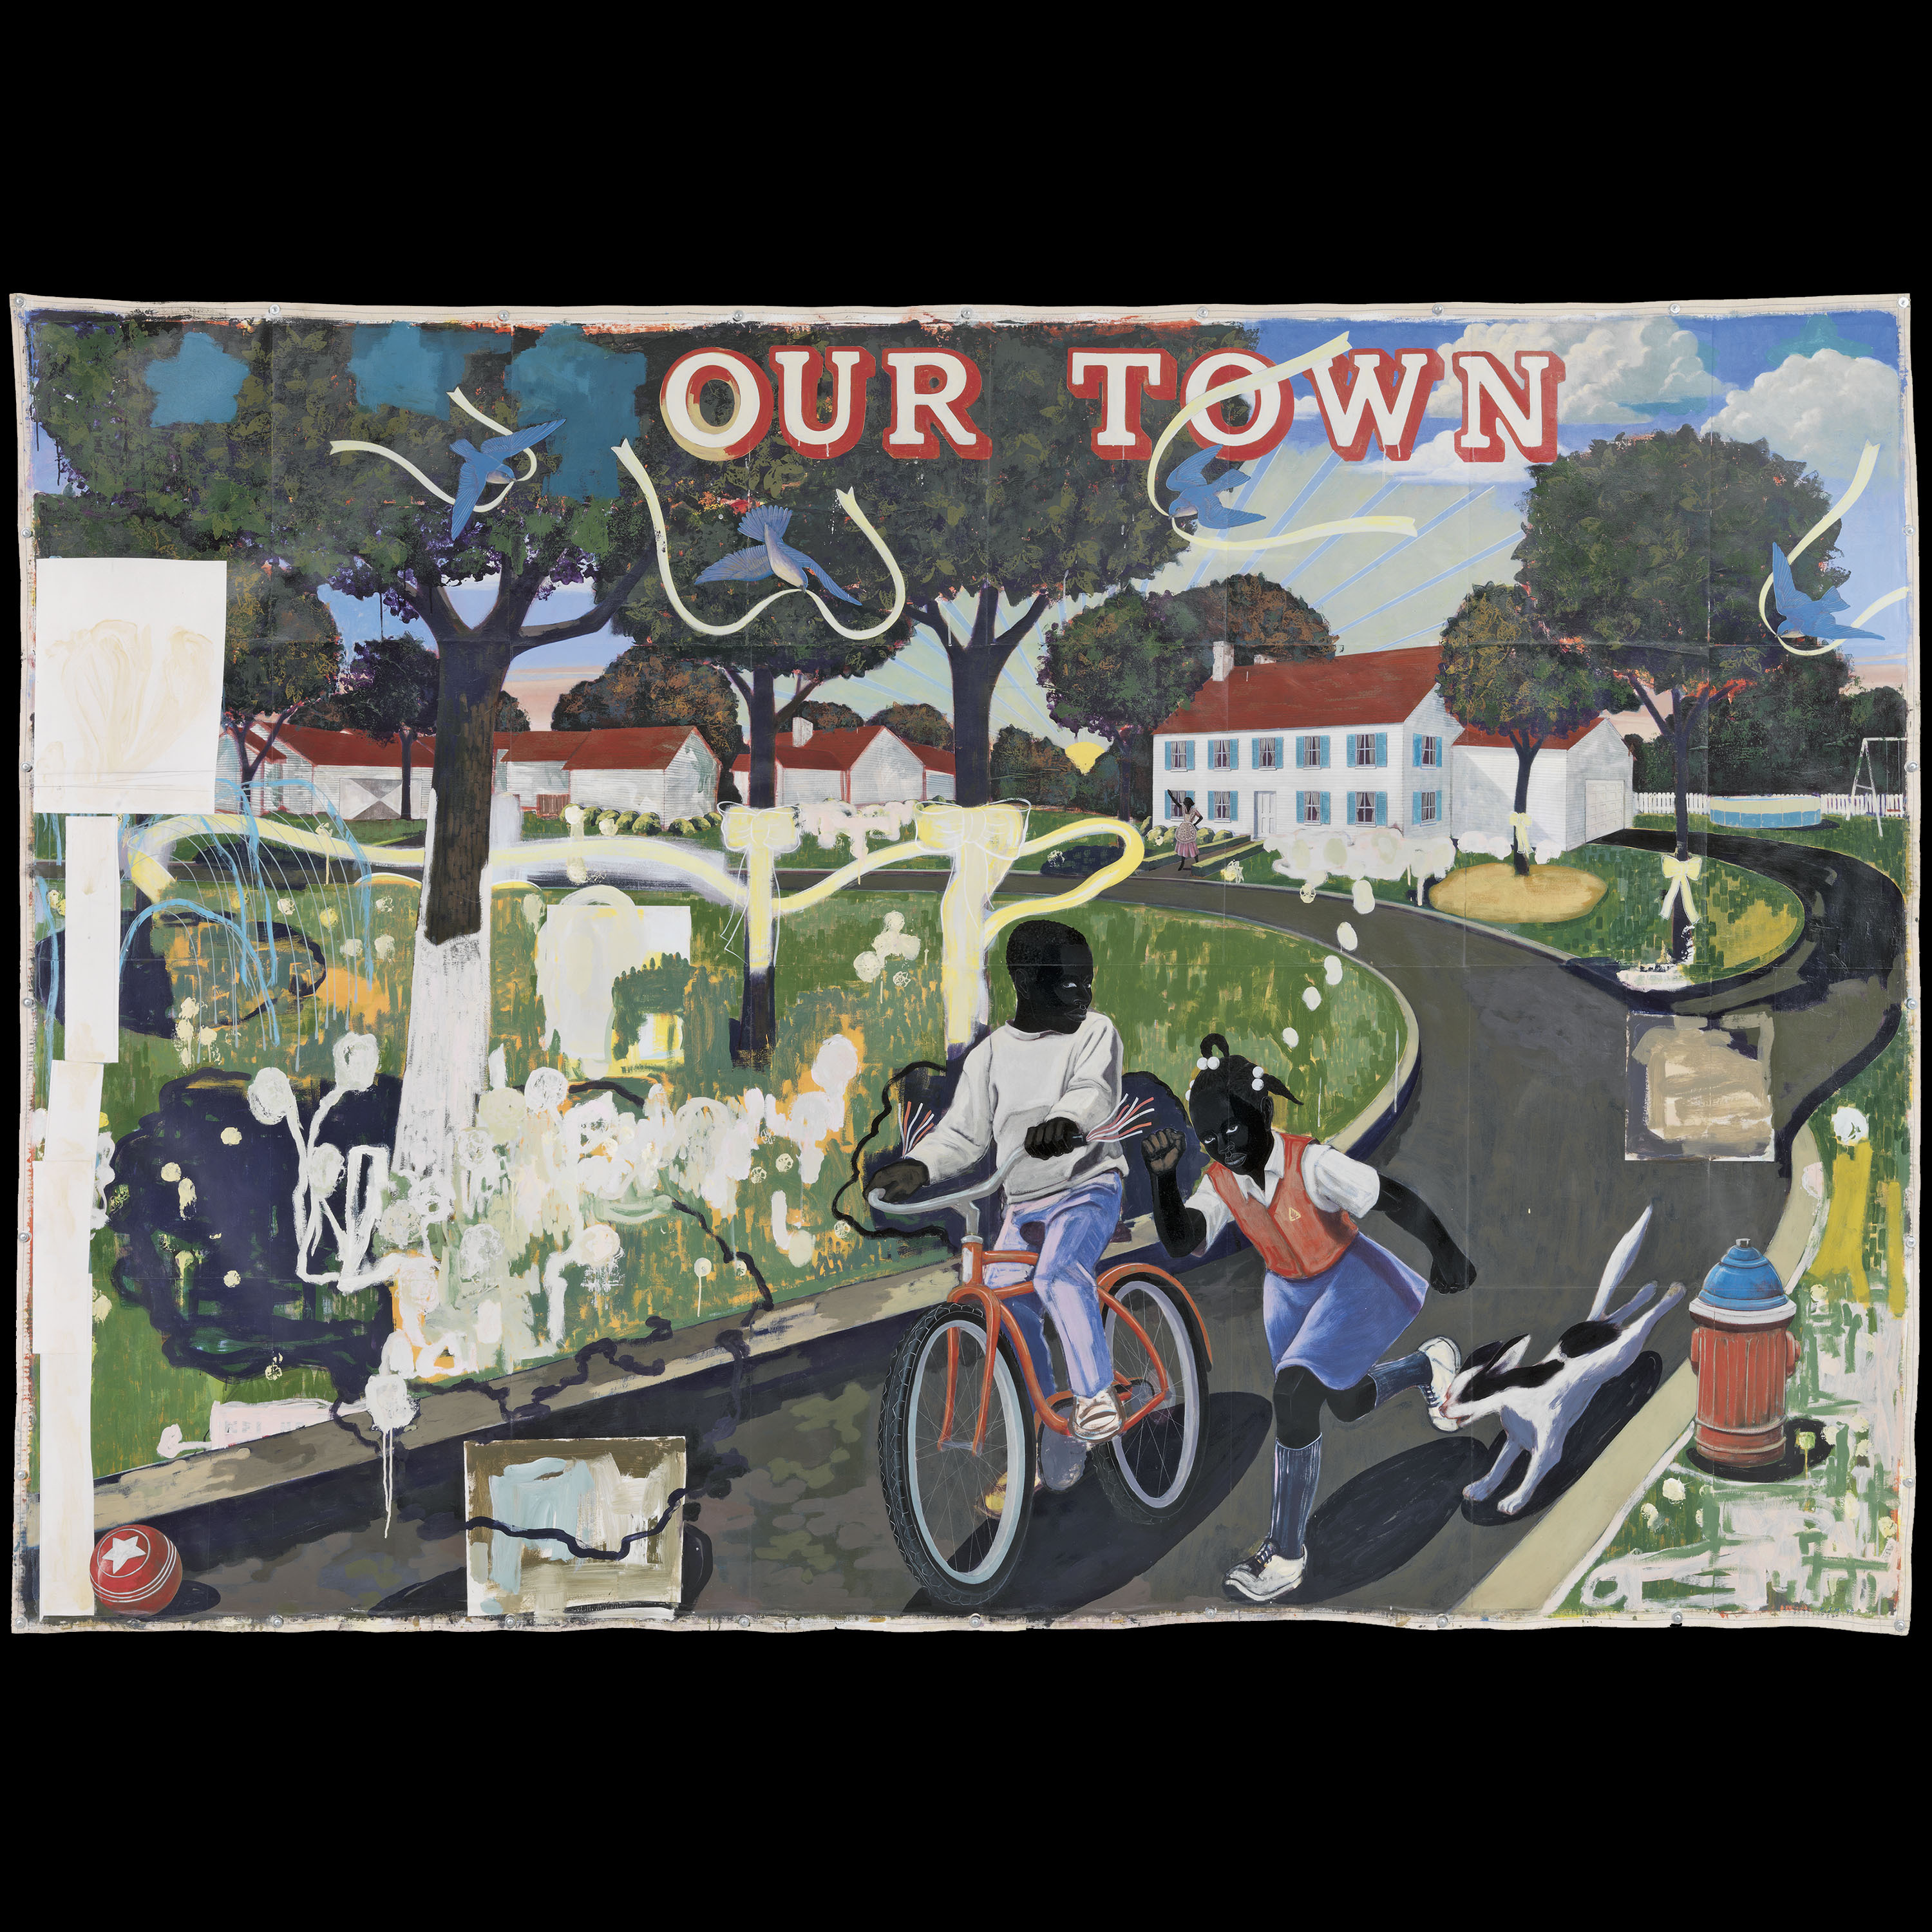 A painting of two Black children on a road, one on a bike and the other running beside him